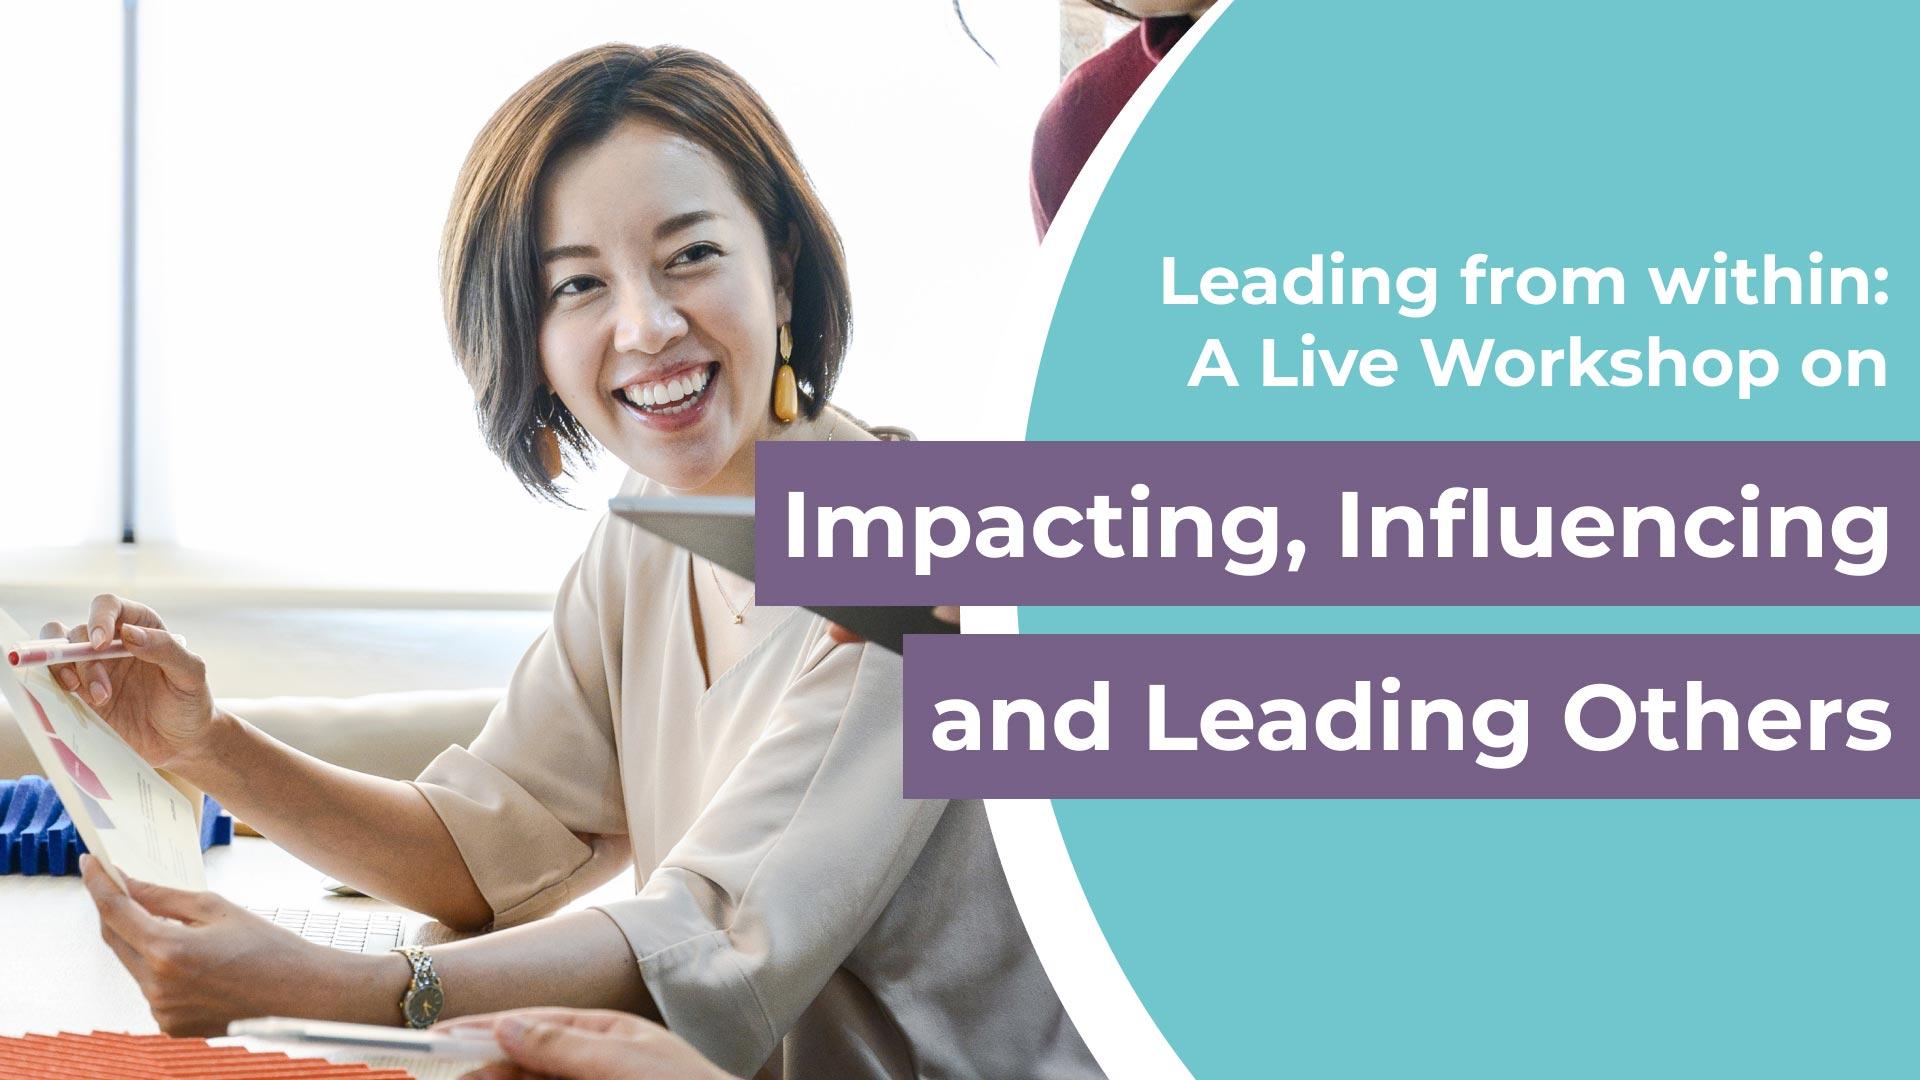 Leading from Within: A Live Workshop on Impacting, Influencing and Leading Others